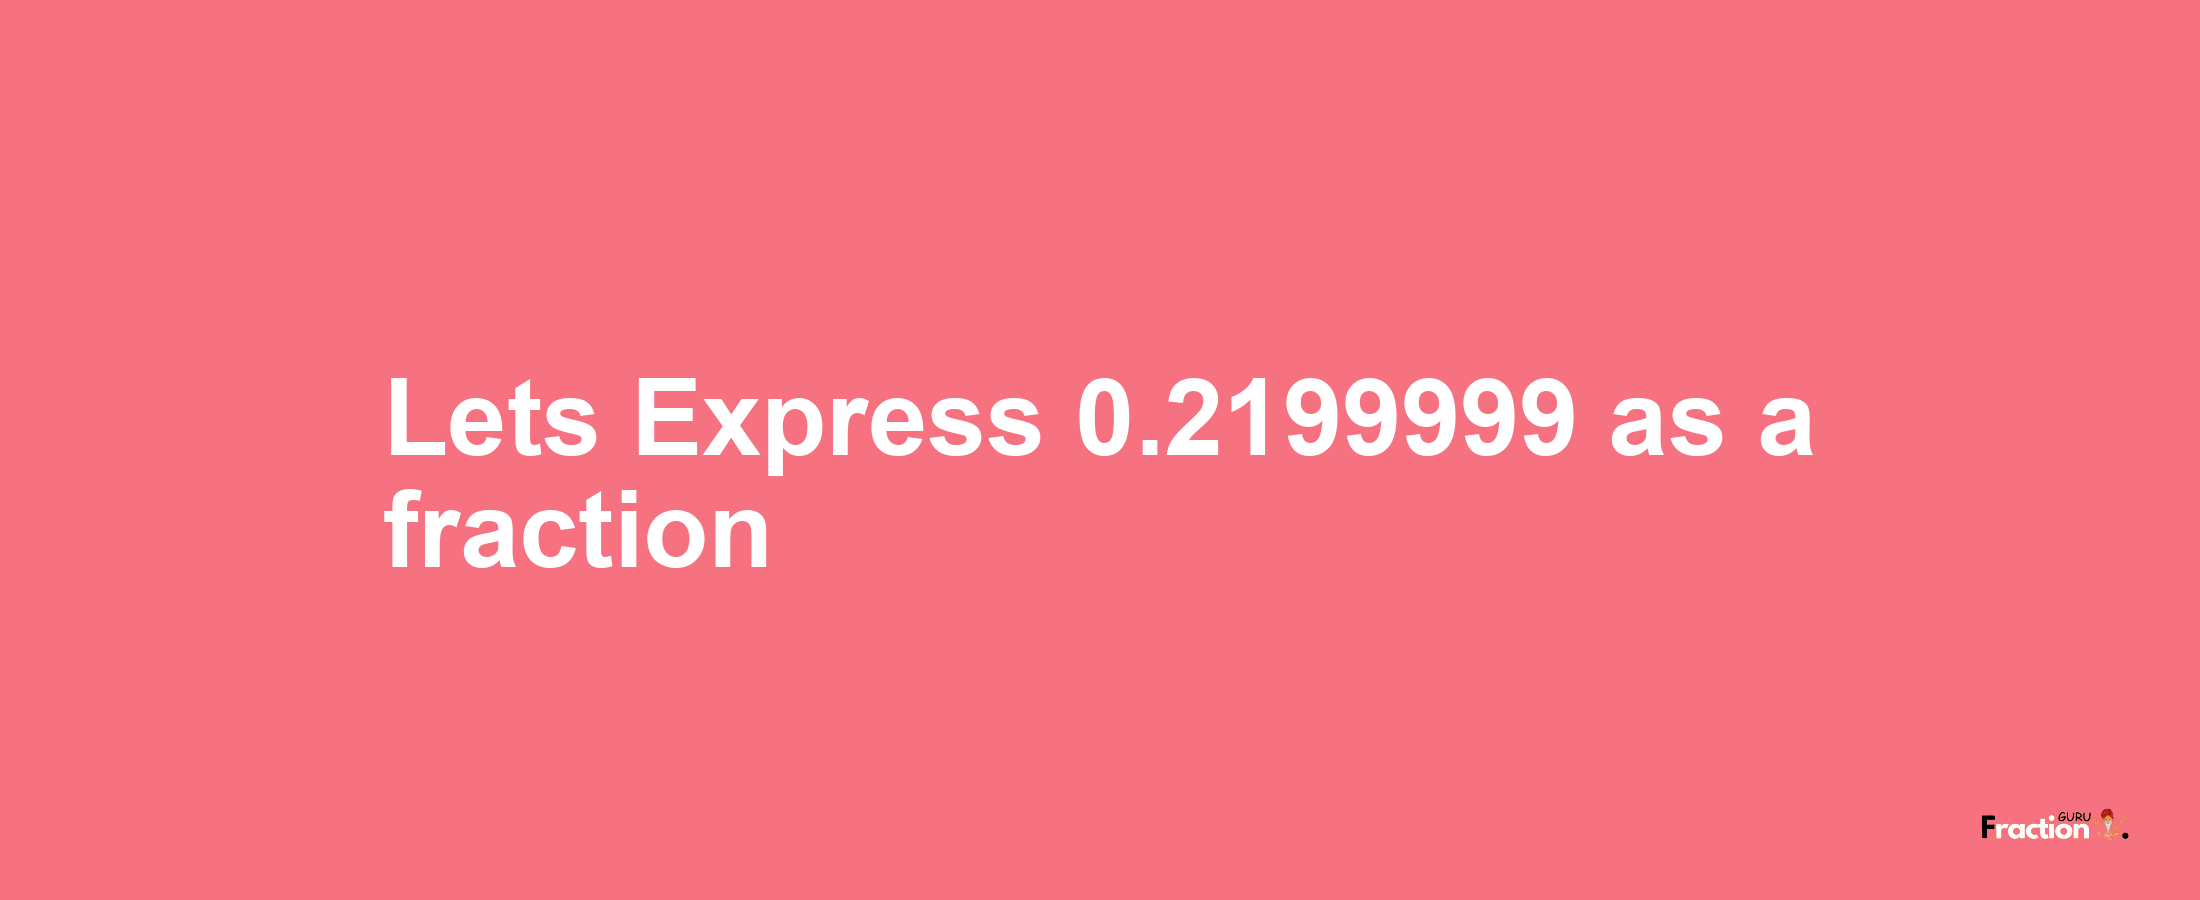 Lets Express 0.2199999 as afraction